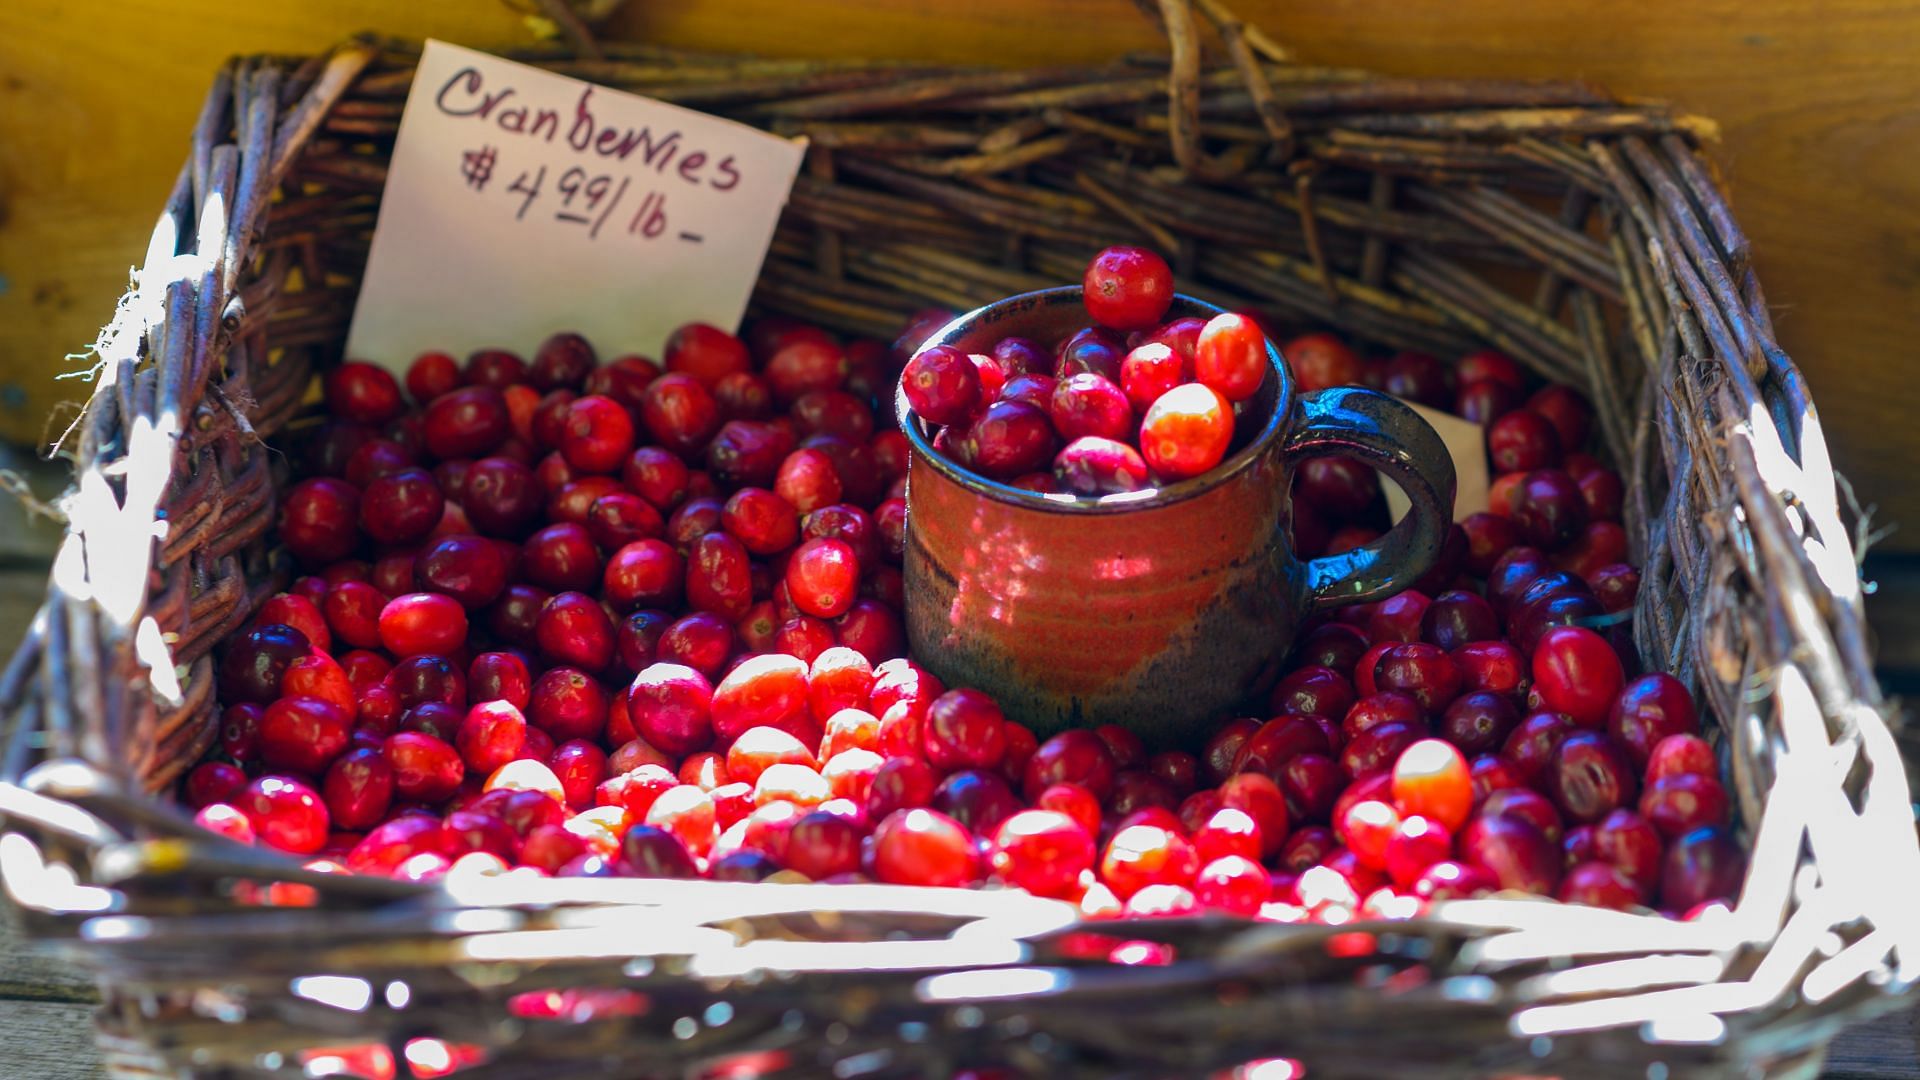 Cranberries can be used in baked goods and smoothies. (Image via Unsplash/Philippe Murray-Pietsch)